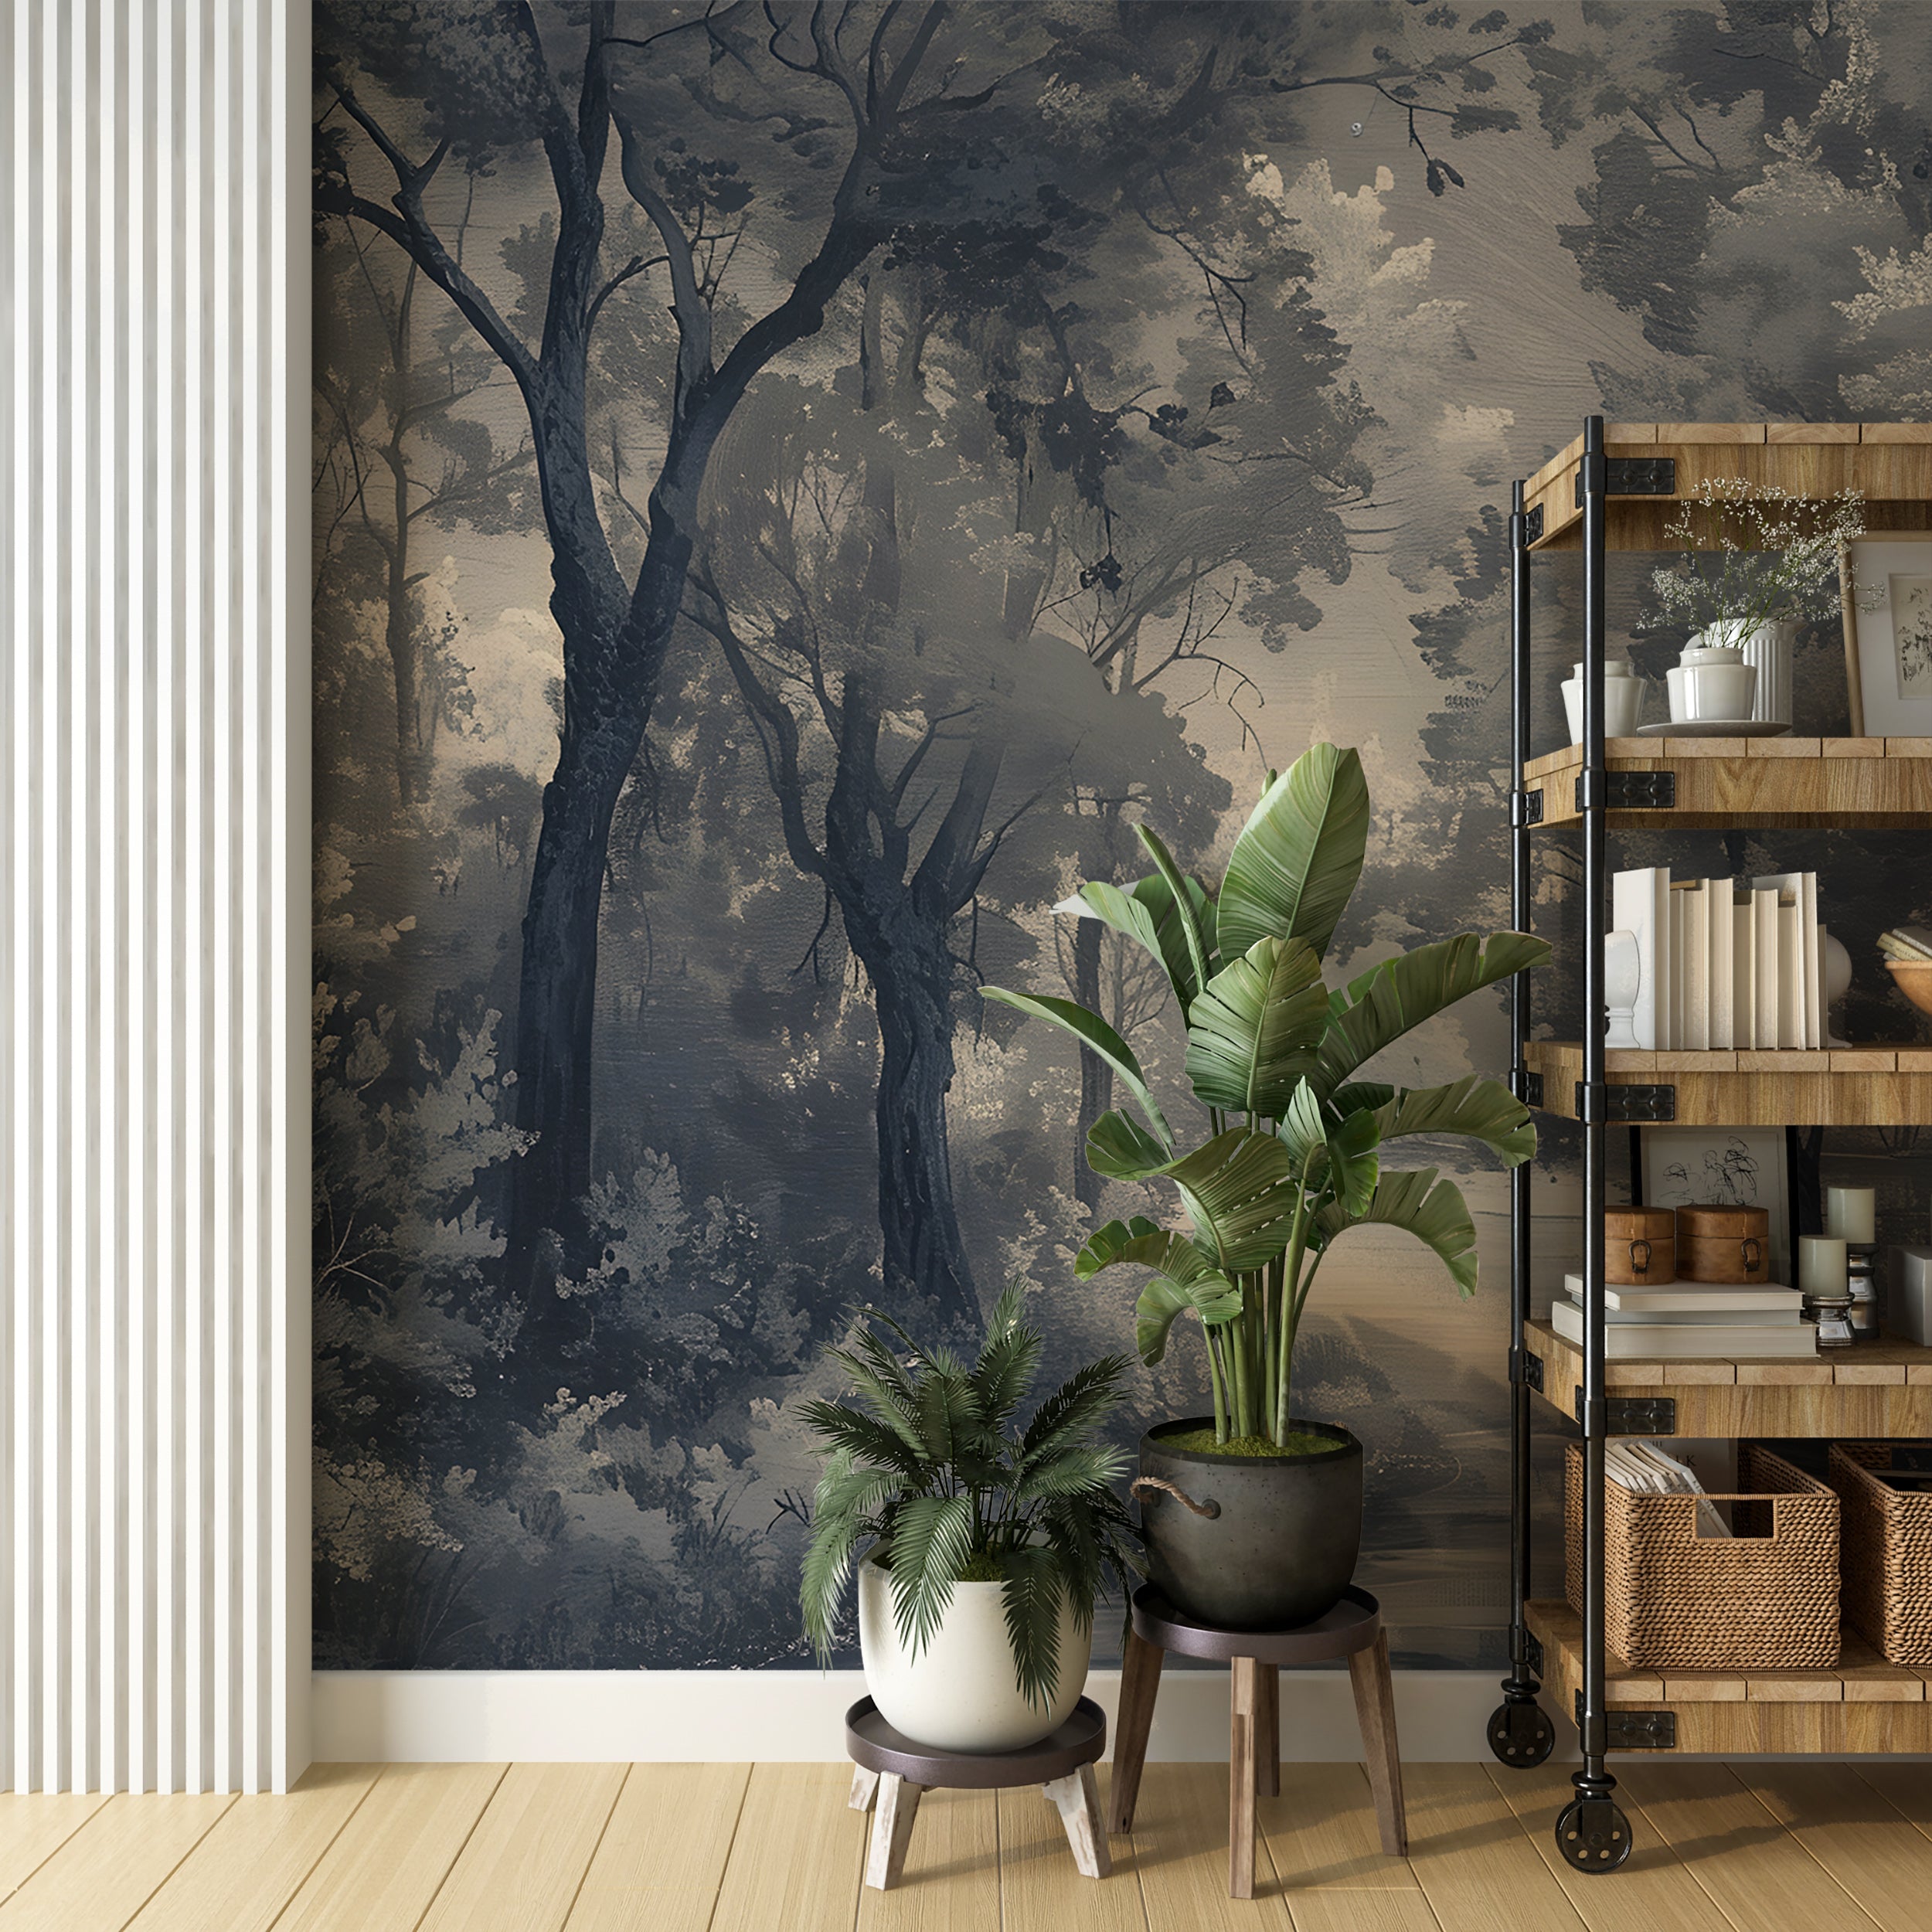 Removable forest landscape decal Classic forest accent wall decor